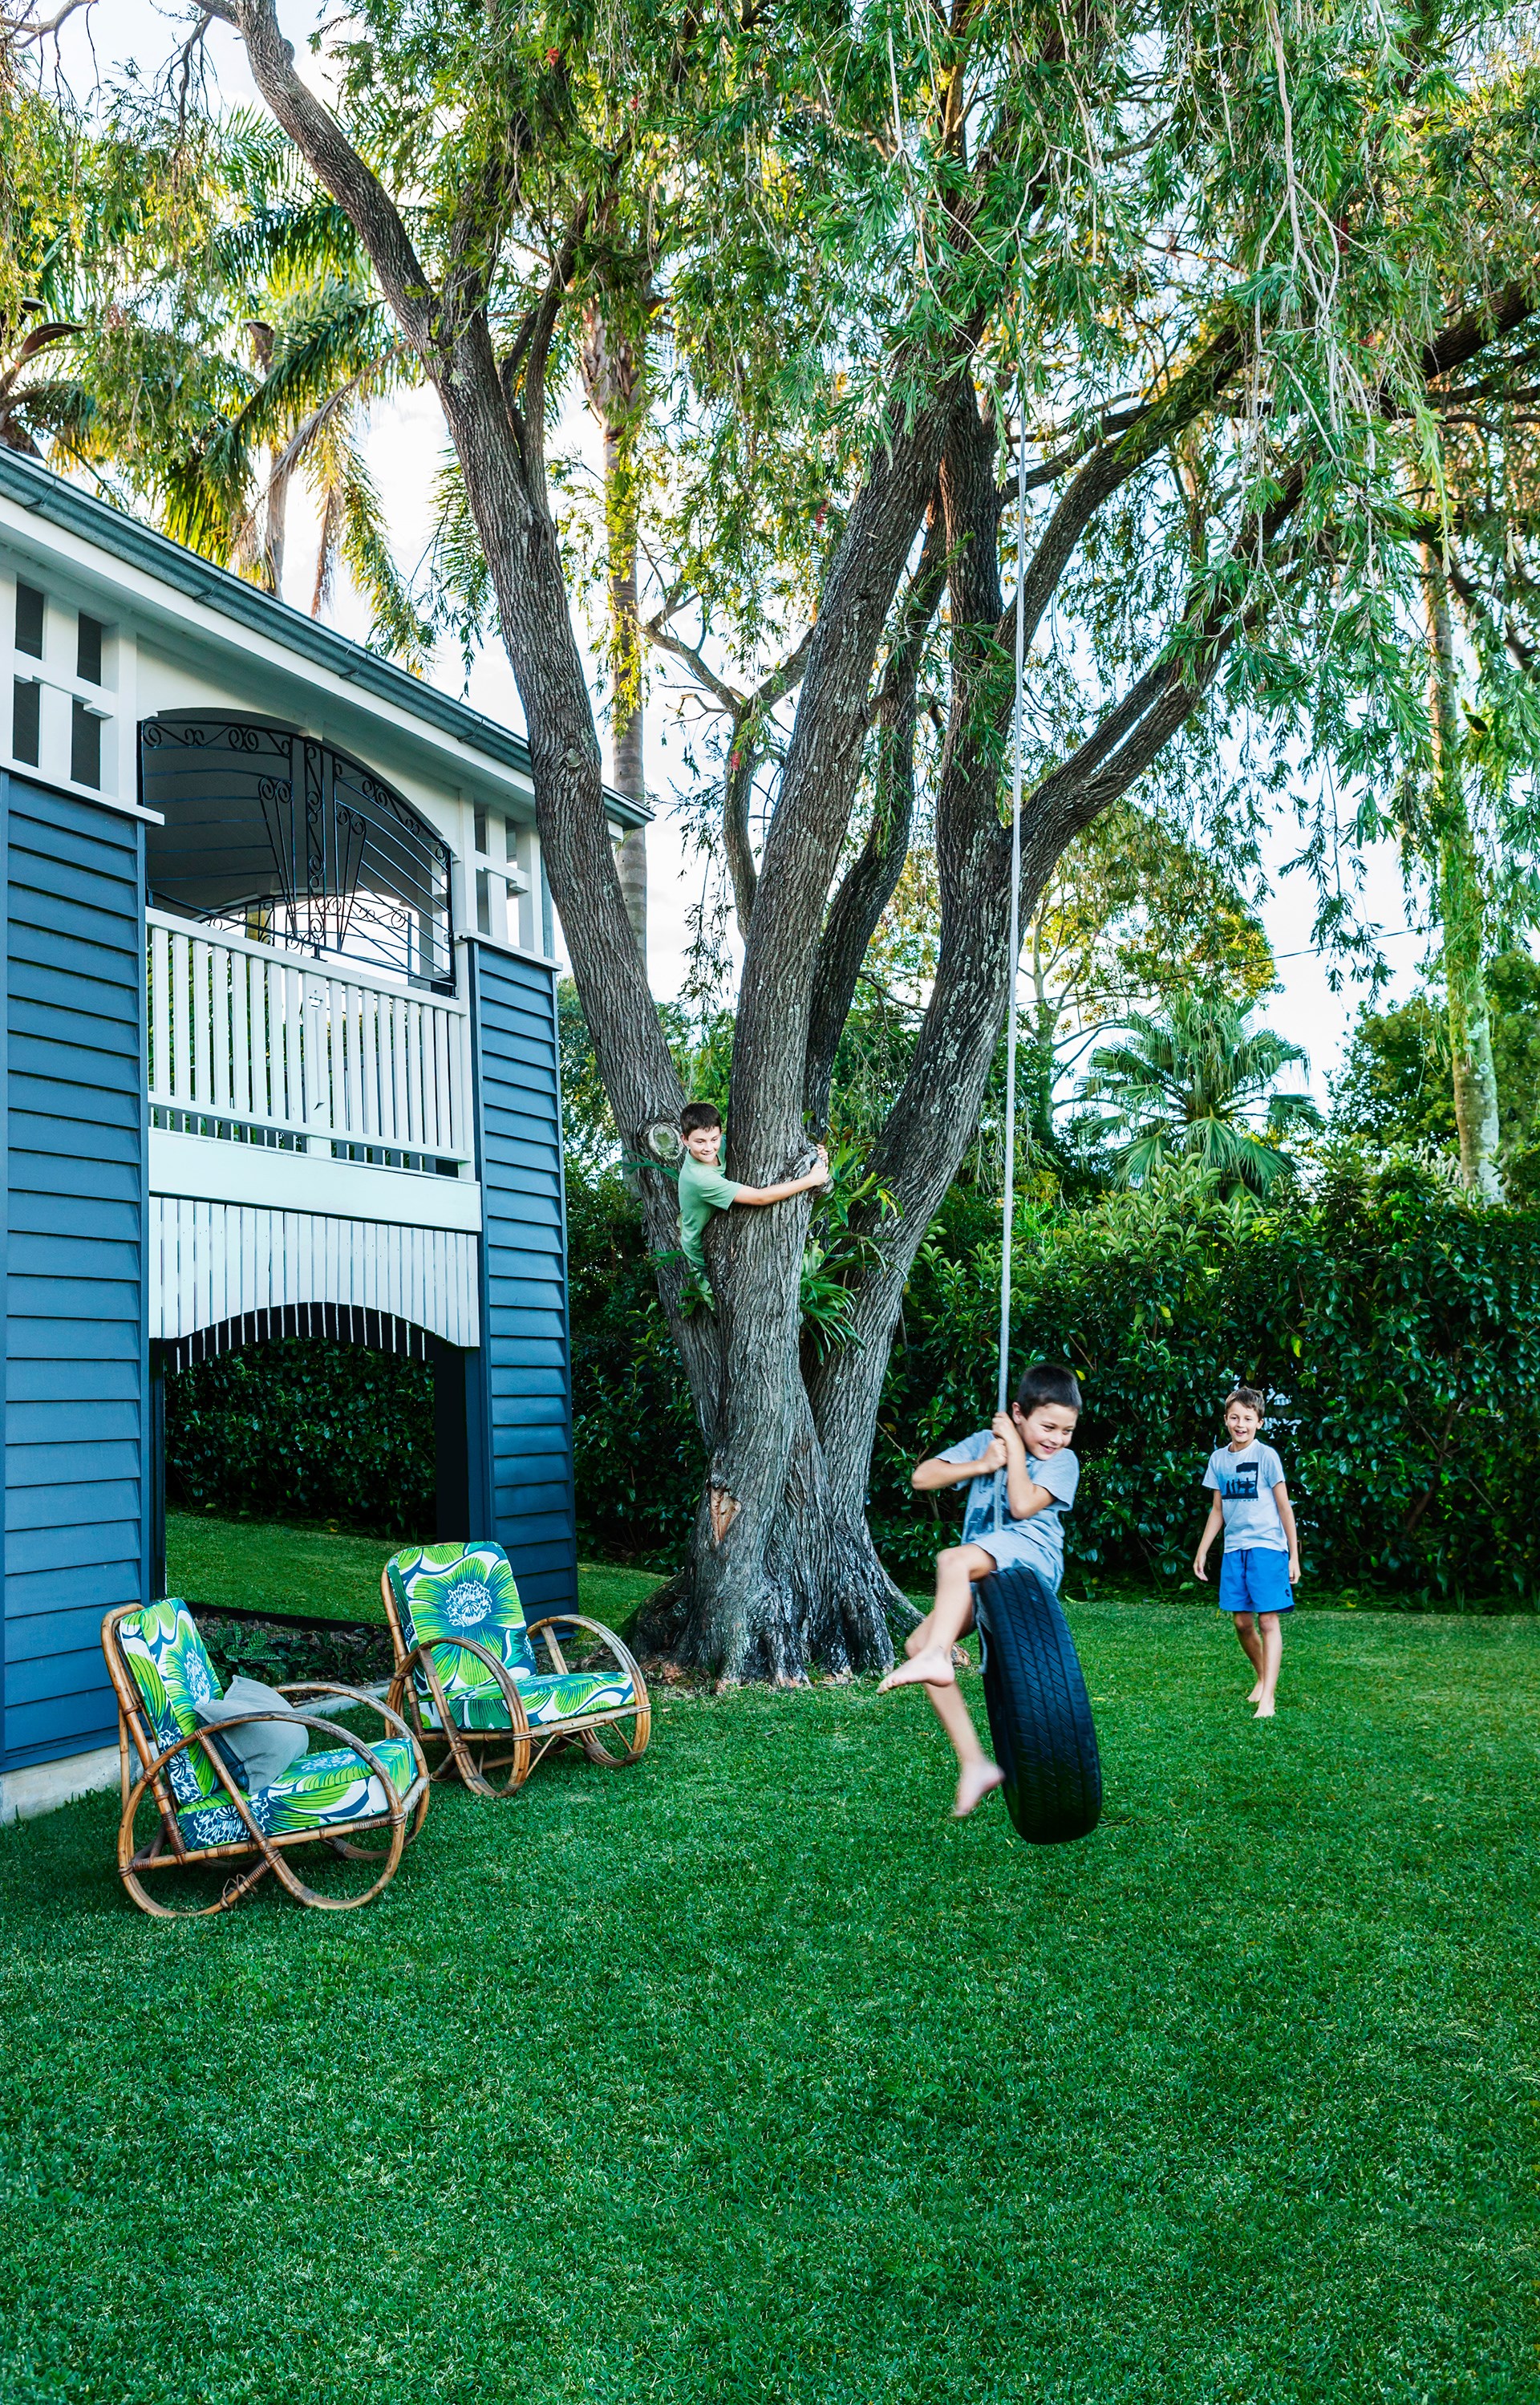 Brothers Tom, Ned and James (from left) make the most of their spacious garden and tire swing. Take the tough of [this renovated country-style Queenslander](http://www.homestolove.com.au/gallery-bettina-and-davids-renovated-queenslander-2224/|target="_blank").